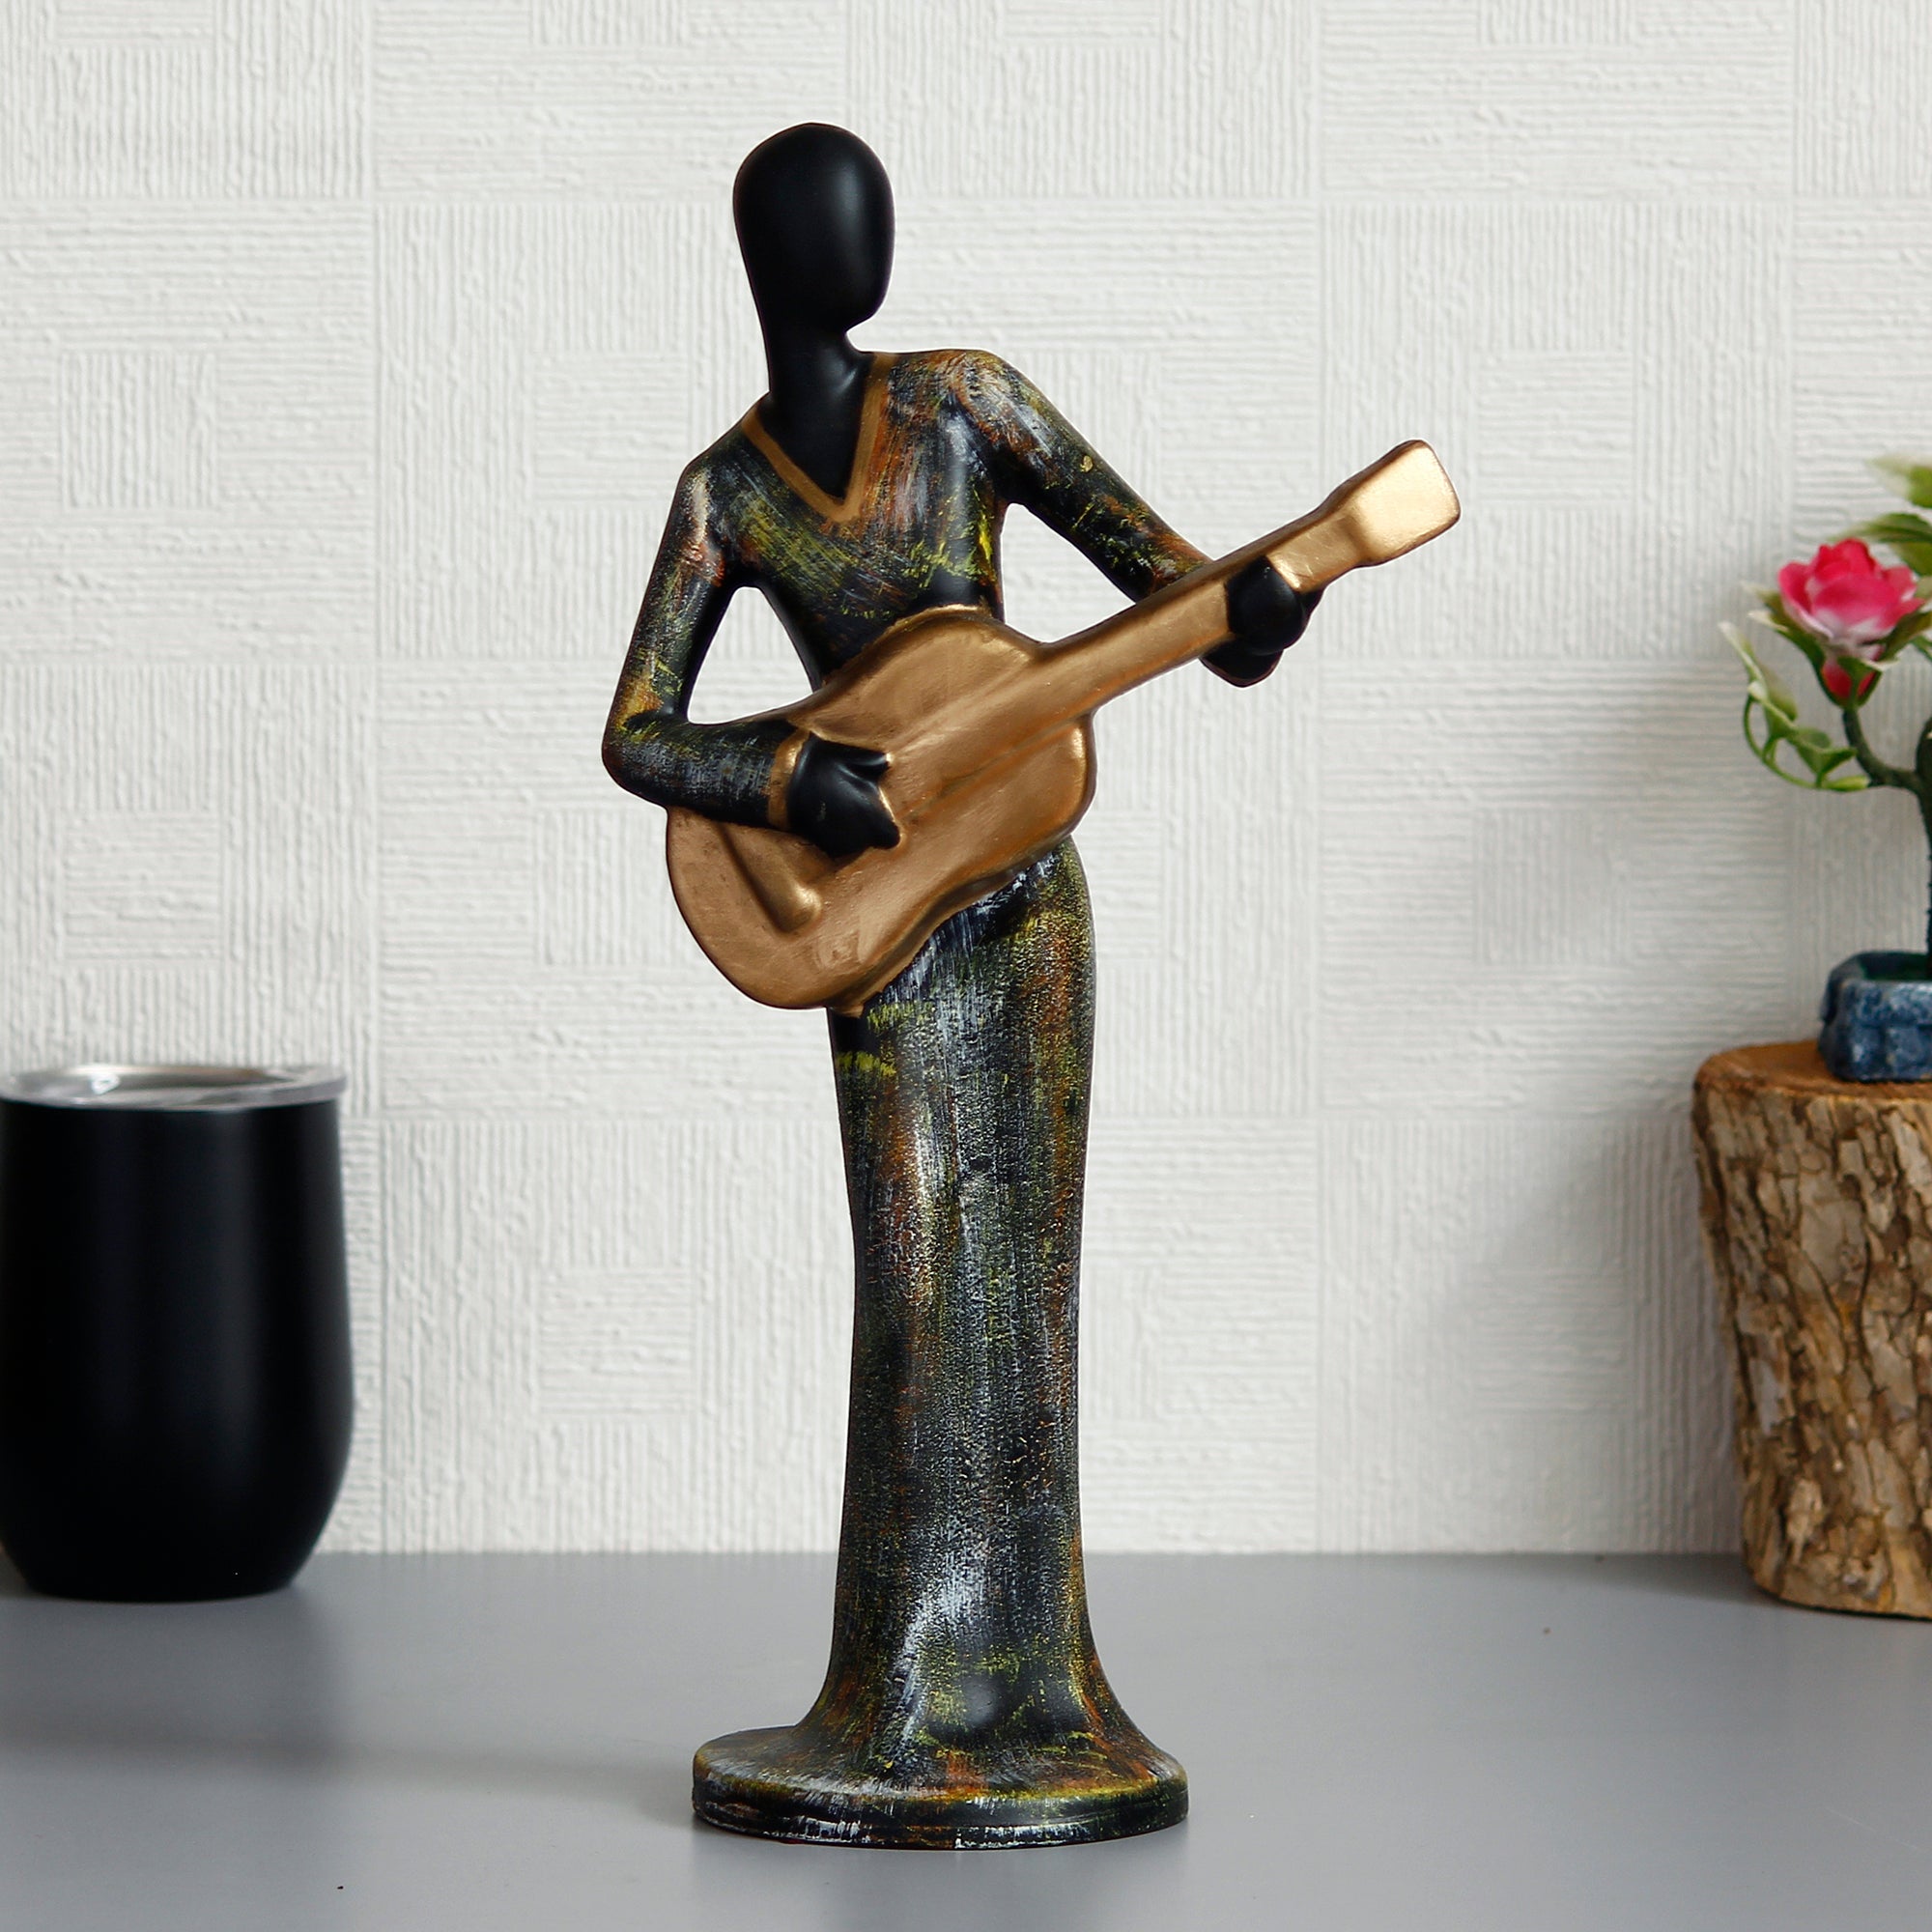 Grey and Black Polyresin Lady figurine Playing Guitar Musical Instrument Handcrafted Decorative Showpiece